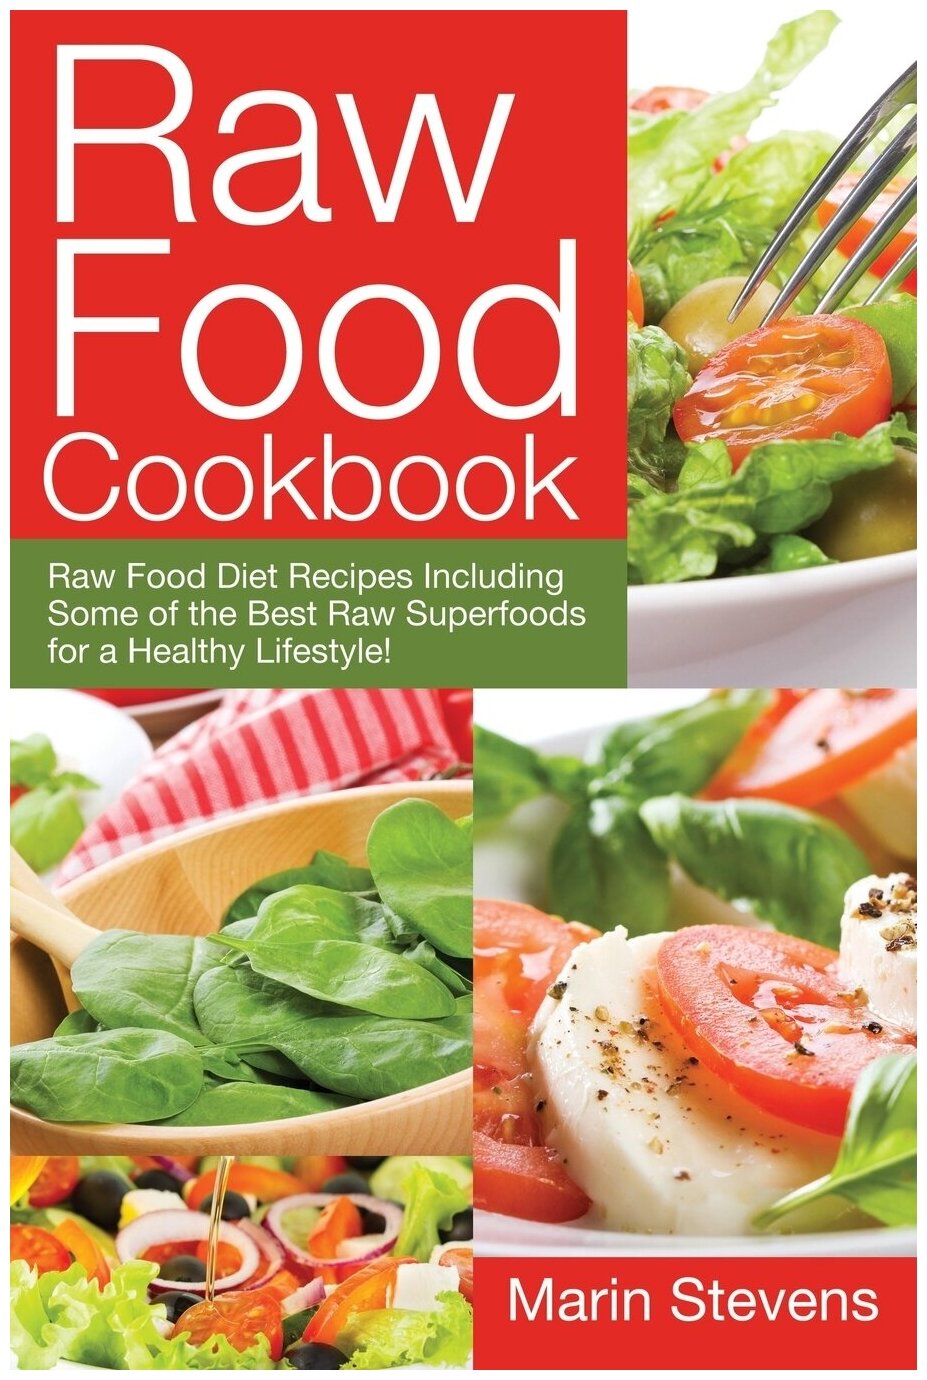 Raw Food Cookbook. Raw Food Diet Recipes Including Some of the Best Raw Superfoods for a Healthy Lifestyle!